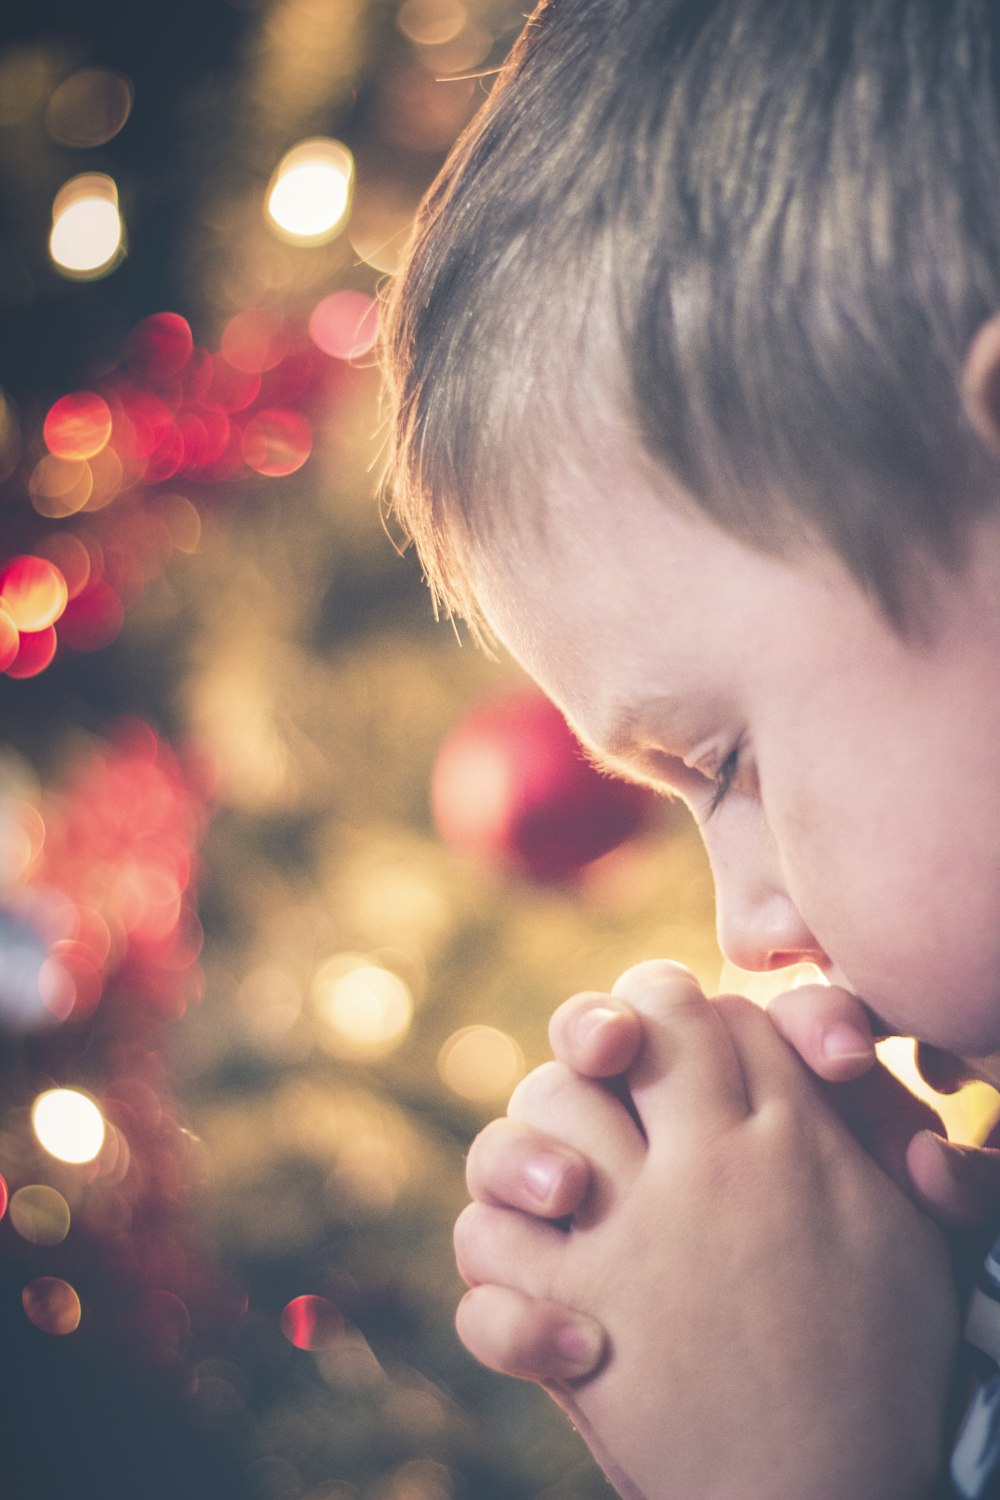 A little boy praying in front of a Christmas tree.